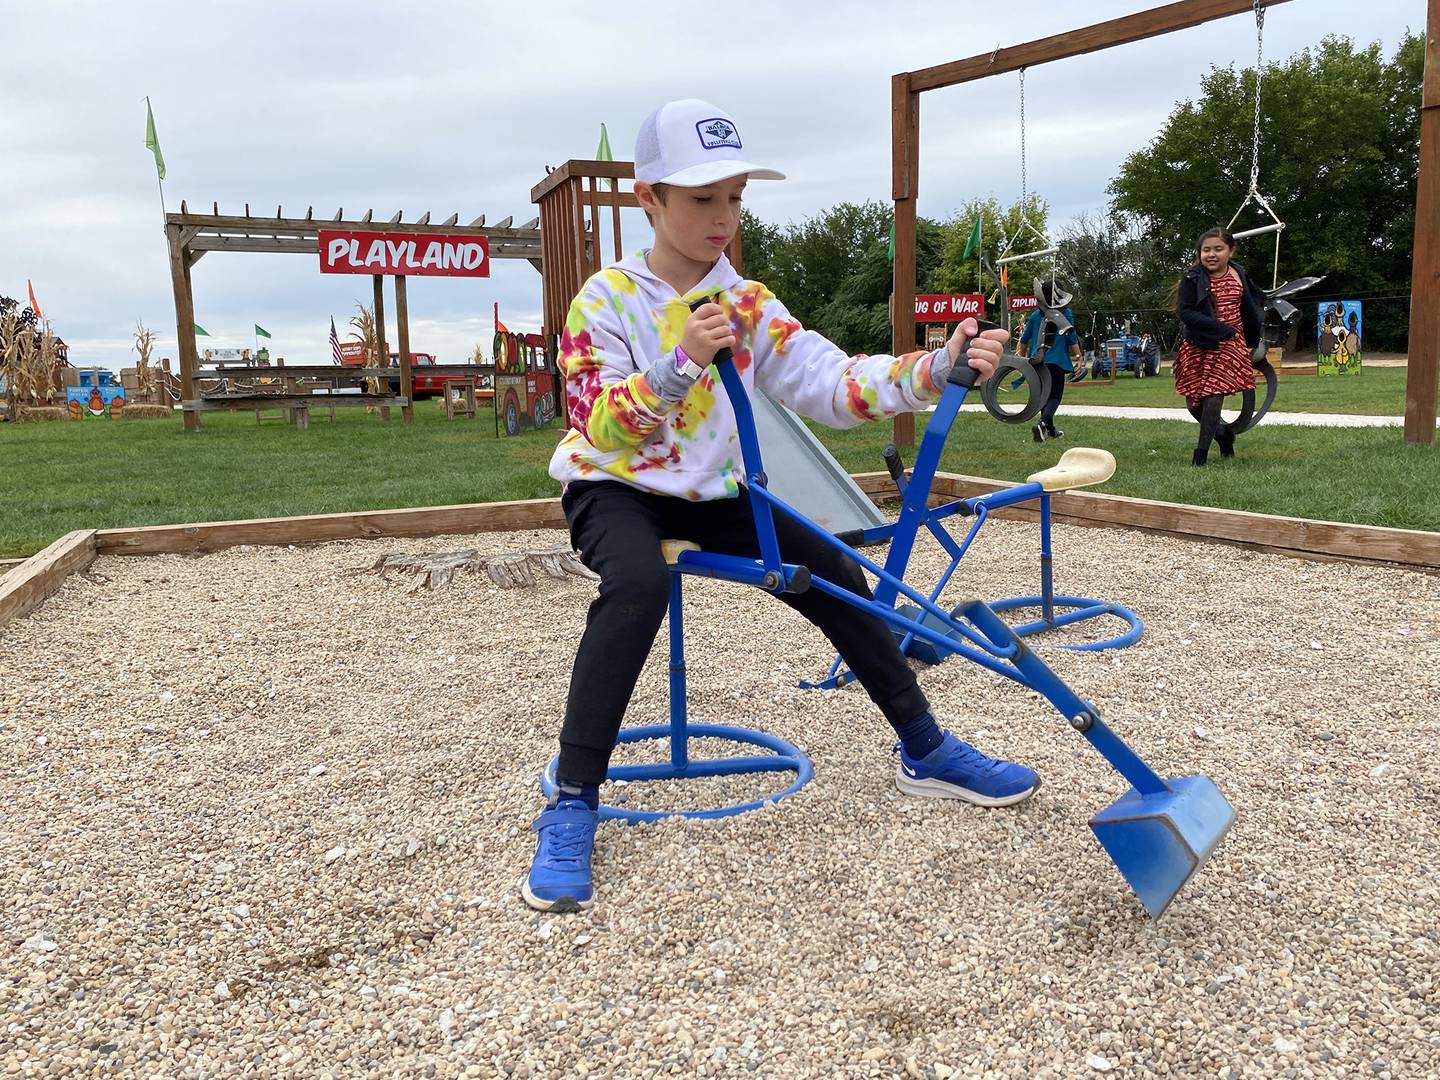 Activities inside the paid attraction area at Windy Acres Farm, 37W446 Fabyan Parkway, Geneva, include gravel diggers and playground equipment.